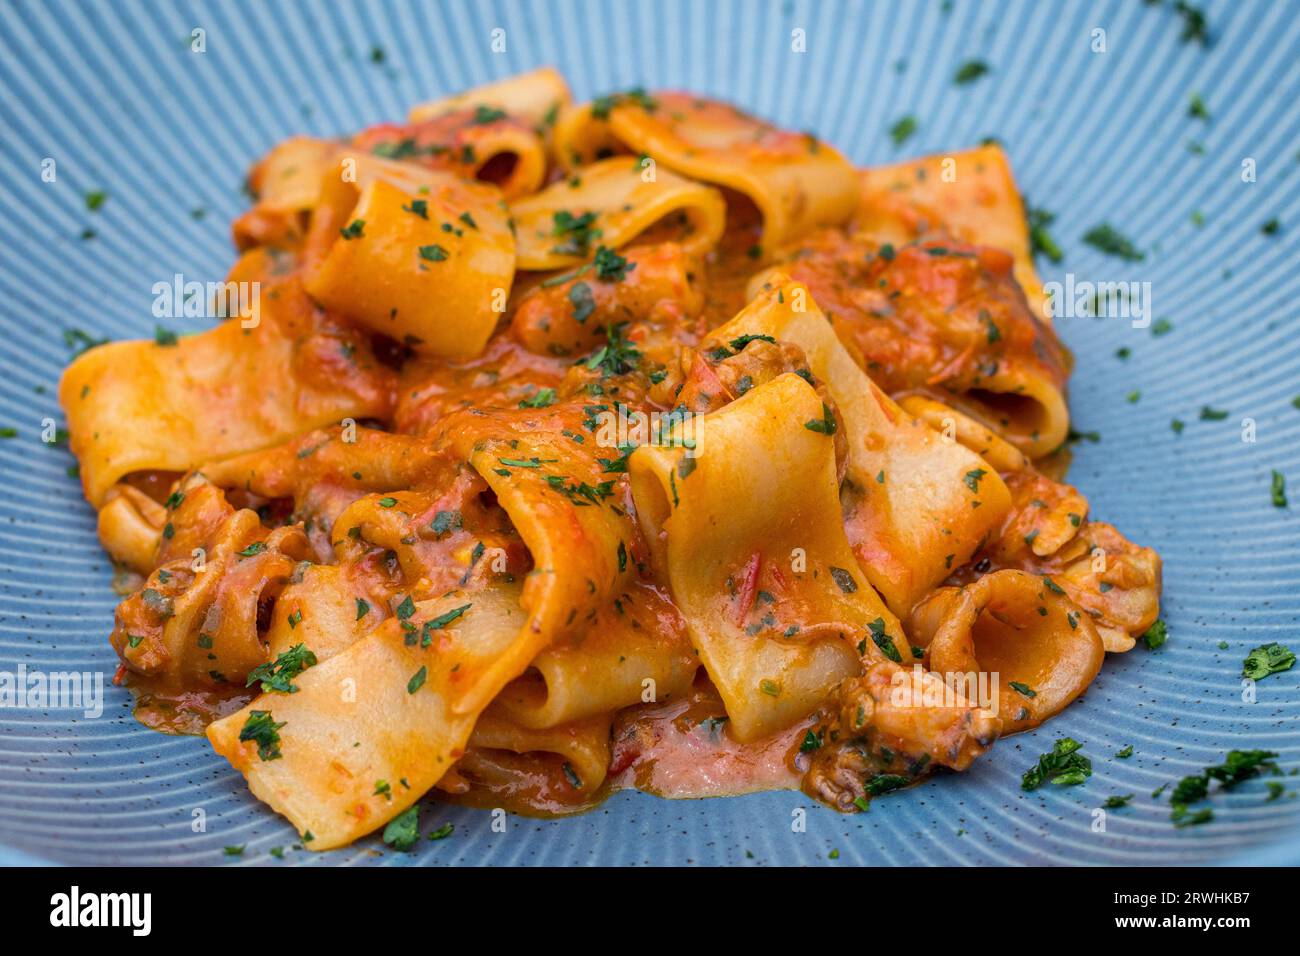 Classic pasta called Calamarata with seafood. Photo of a plate with blue and white stripes garnished with fresh parsley. First fish course. Stock Photo